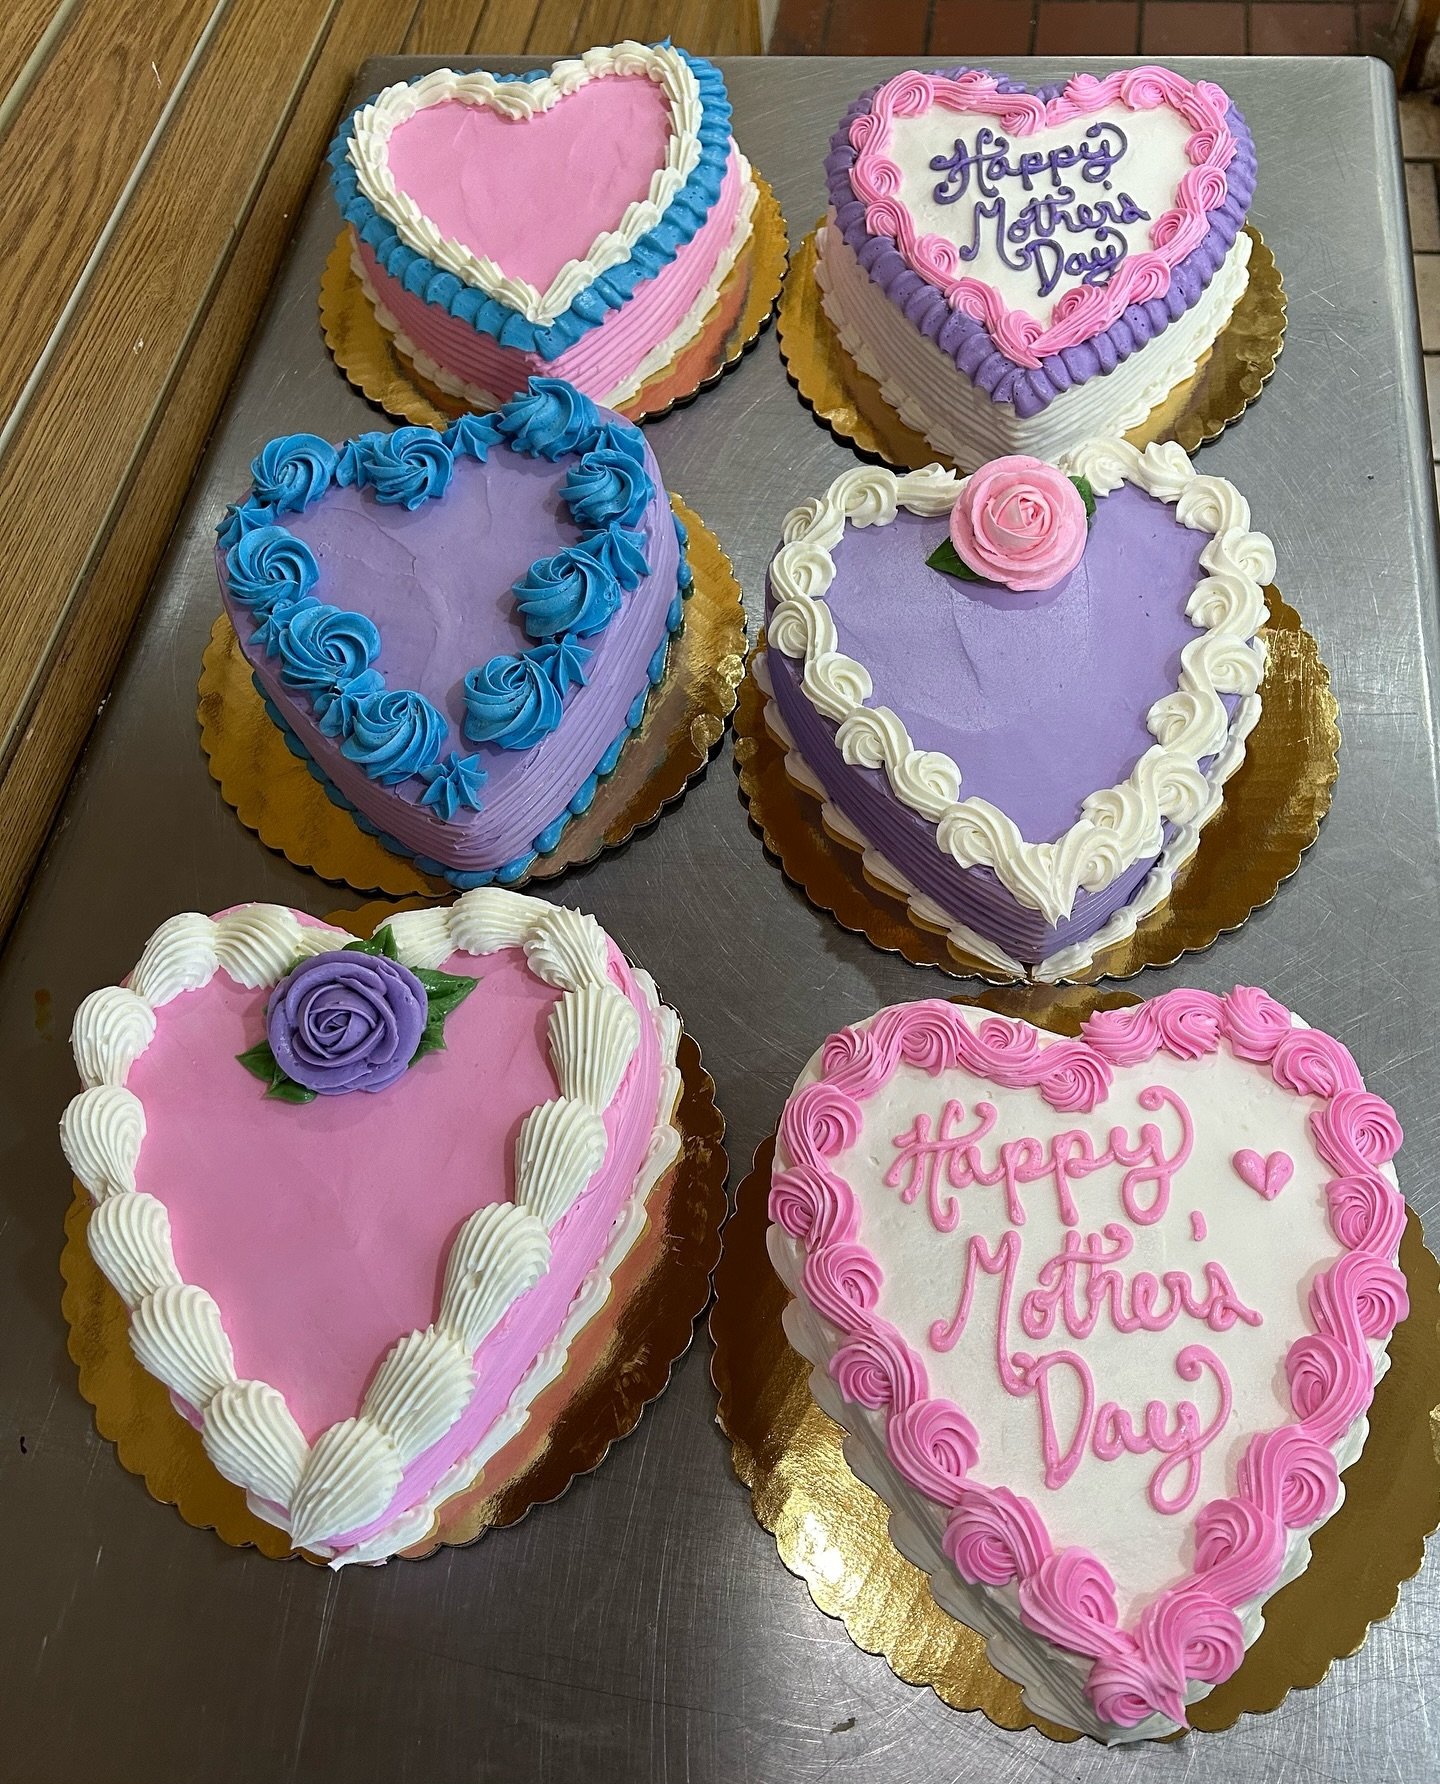 Celebrate mom with a heart cake! Many cakes to chose from that mom will love in store 💜💕🌹